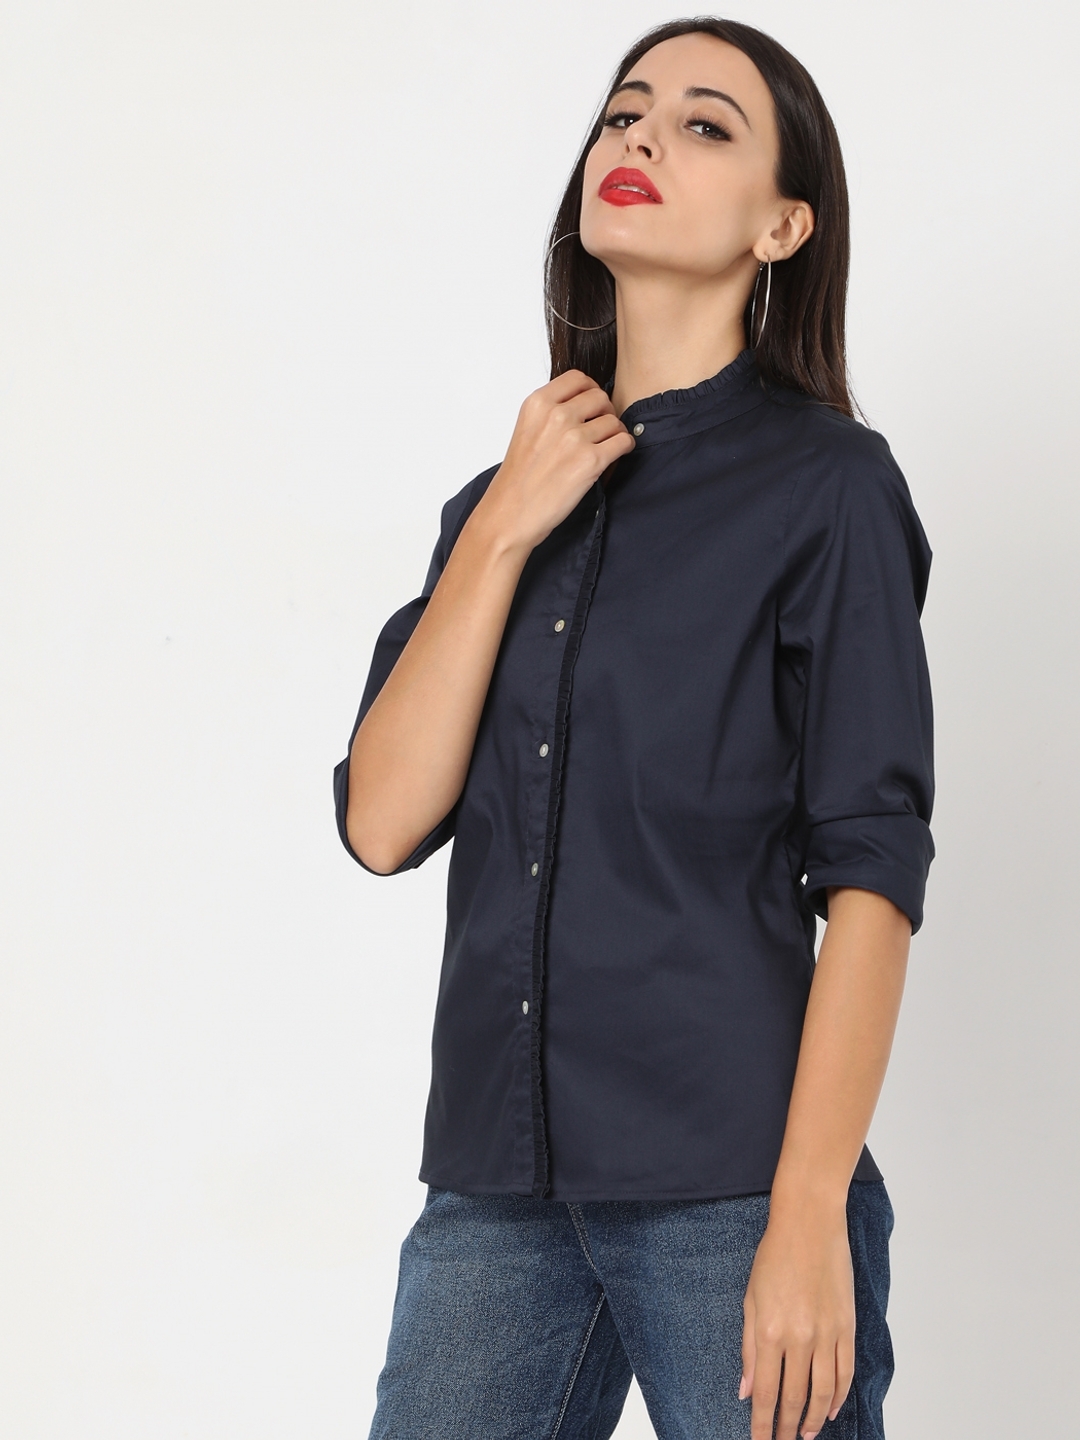 Full Sleeves Shirt with Band Collar